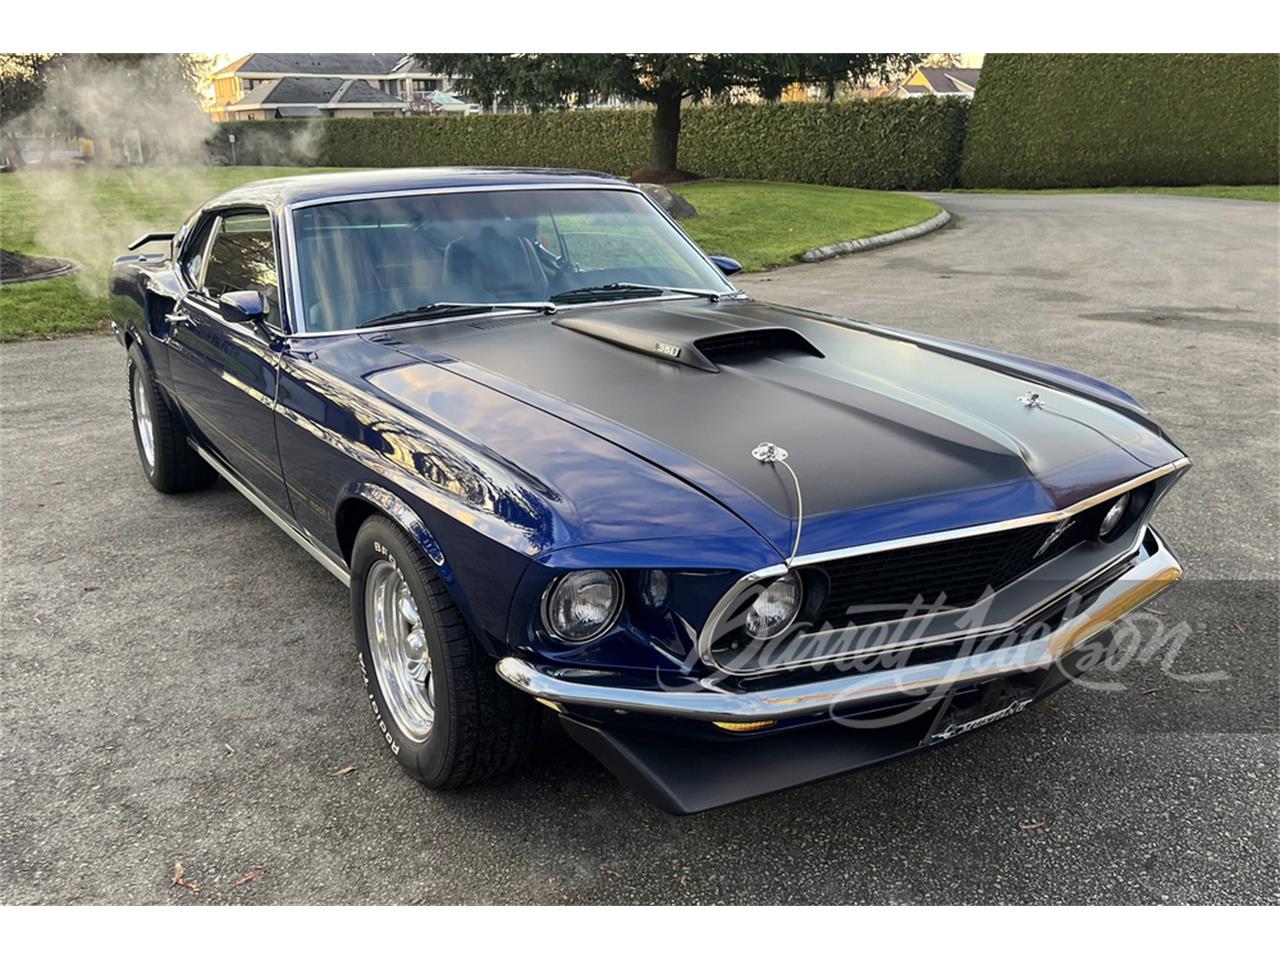 For Sale at Auction: 1969 Ford Mustang Mach 1 in Scottsdale, Arizona for sale in Scottsdale, AZ